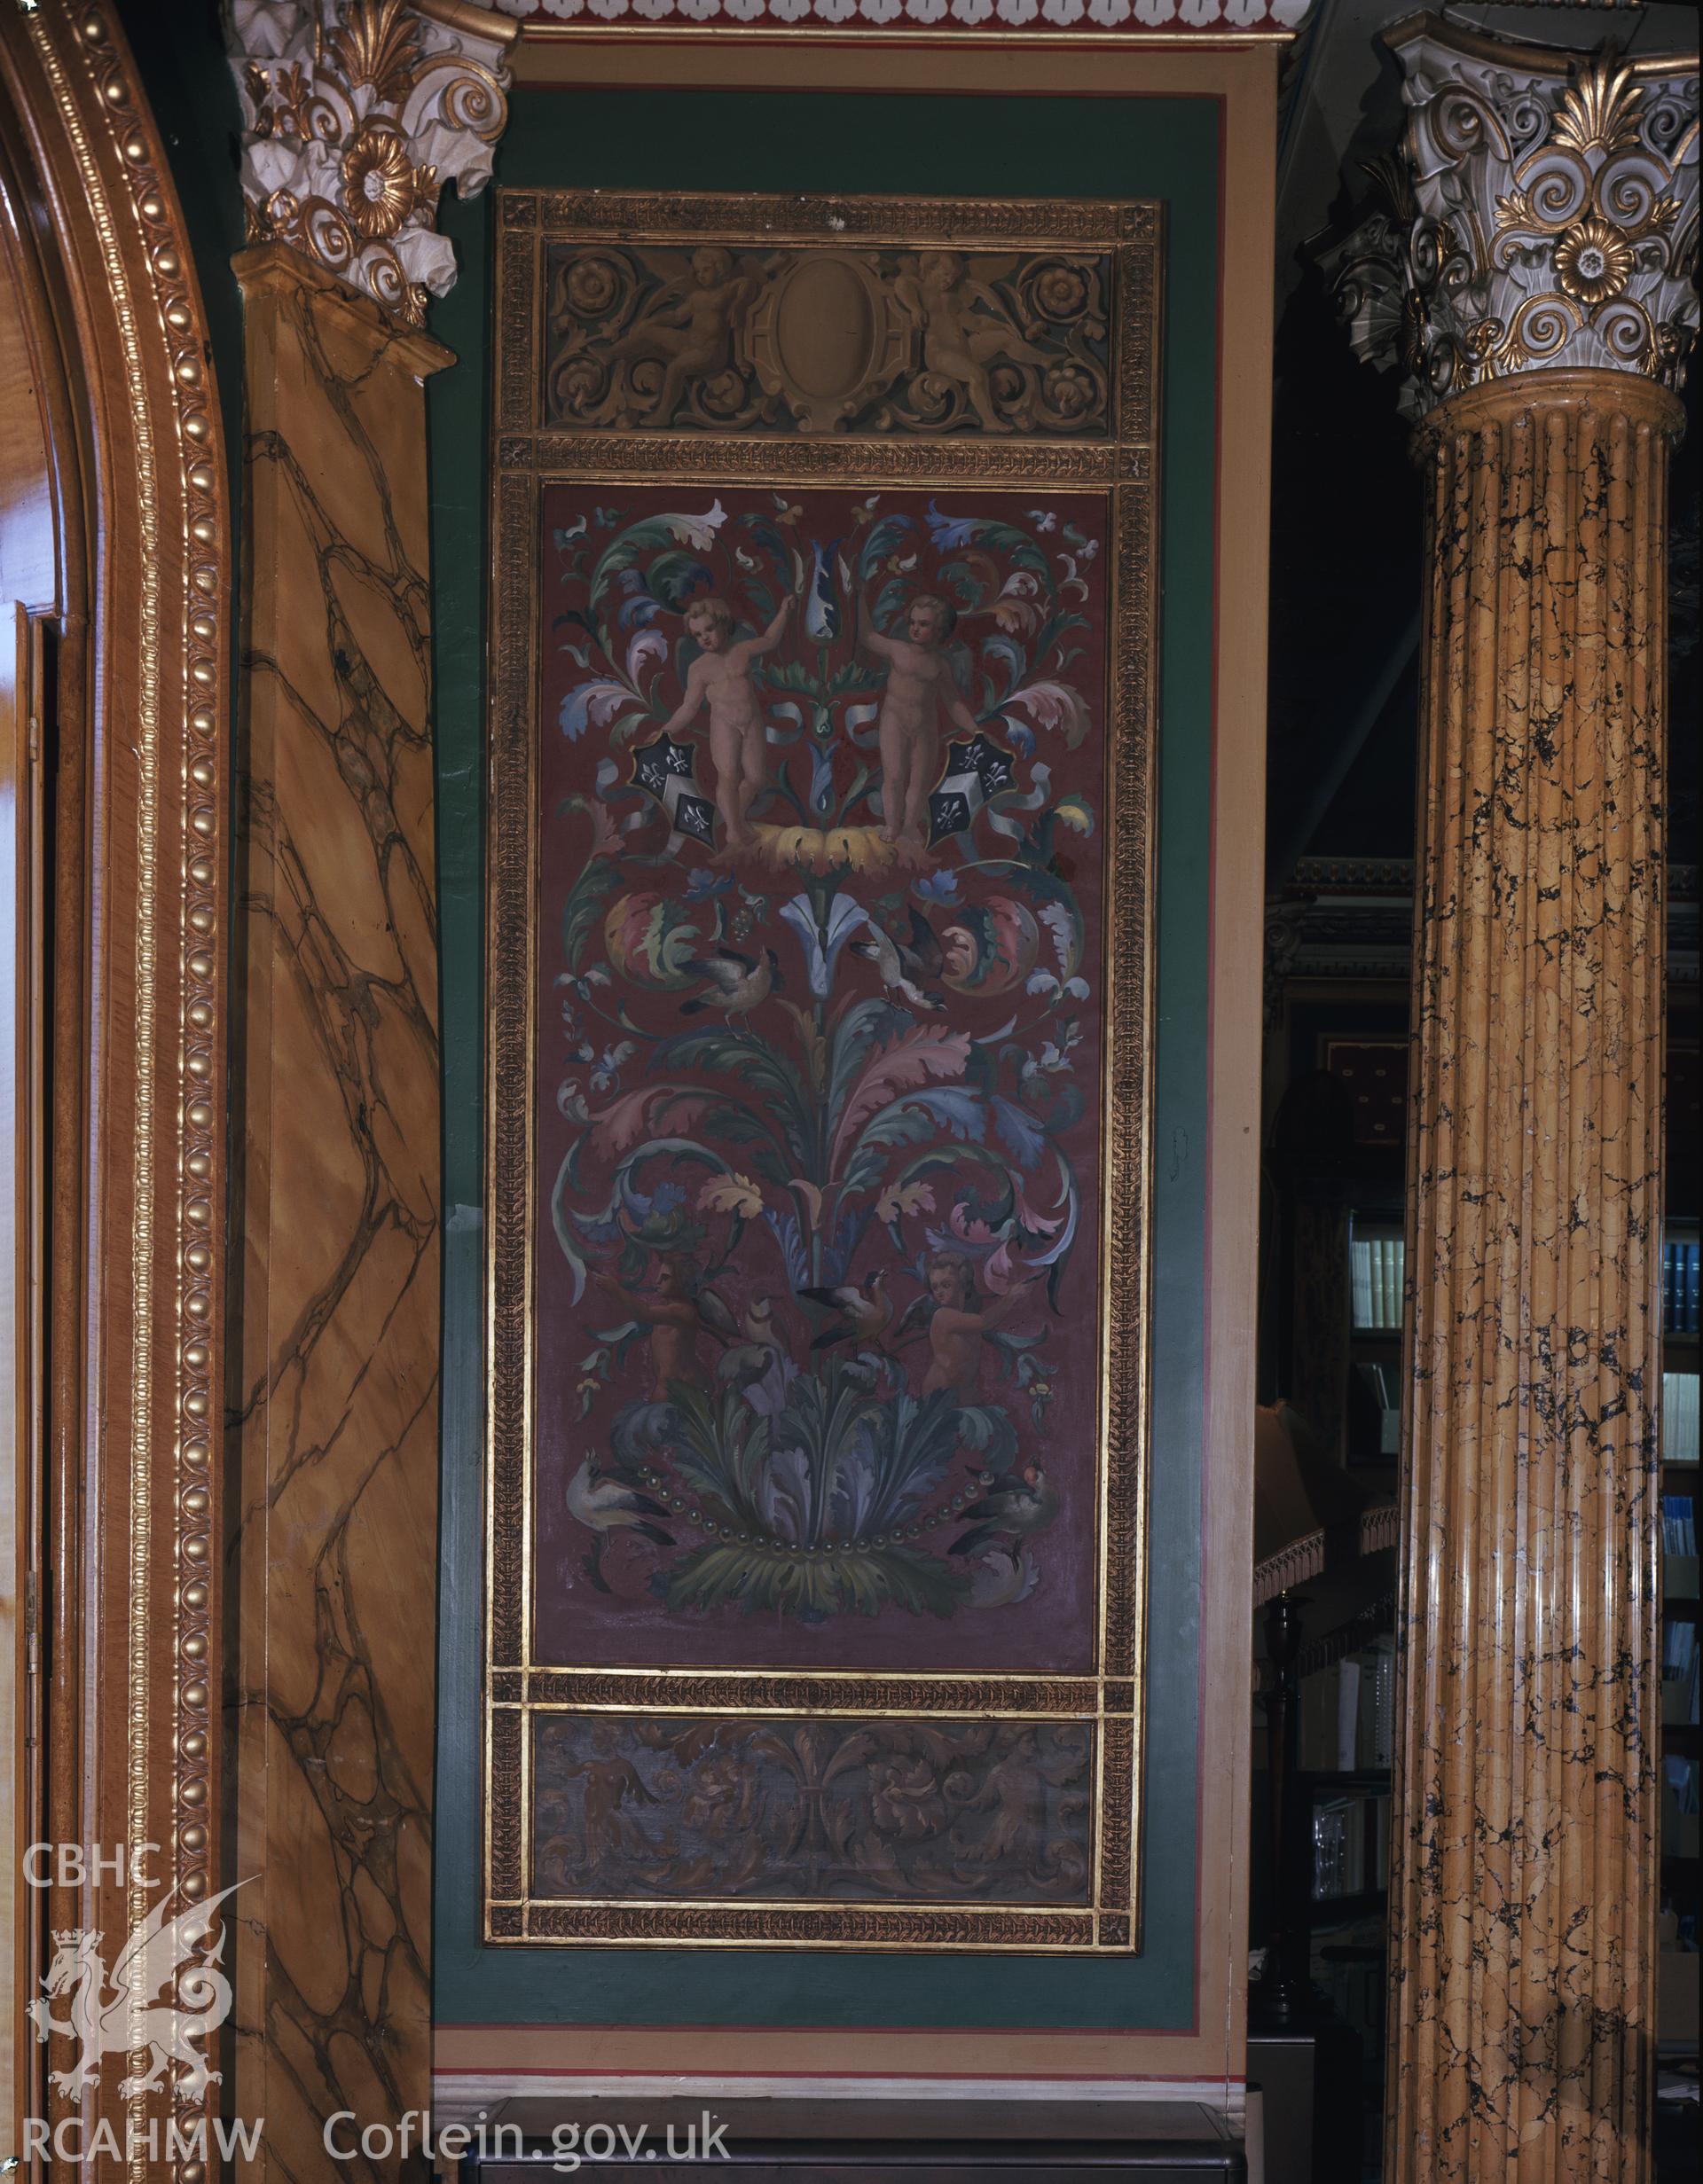 Colour image showing ceiling detail in the library at Trawscoed.